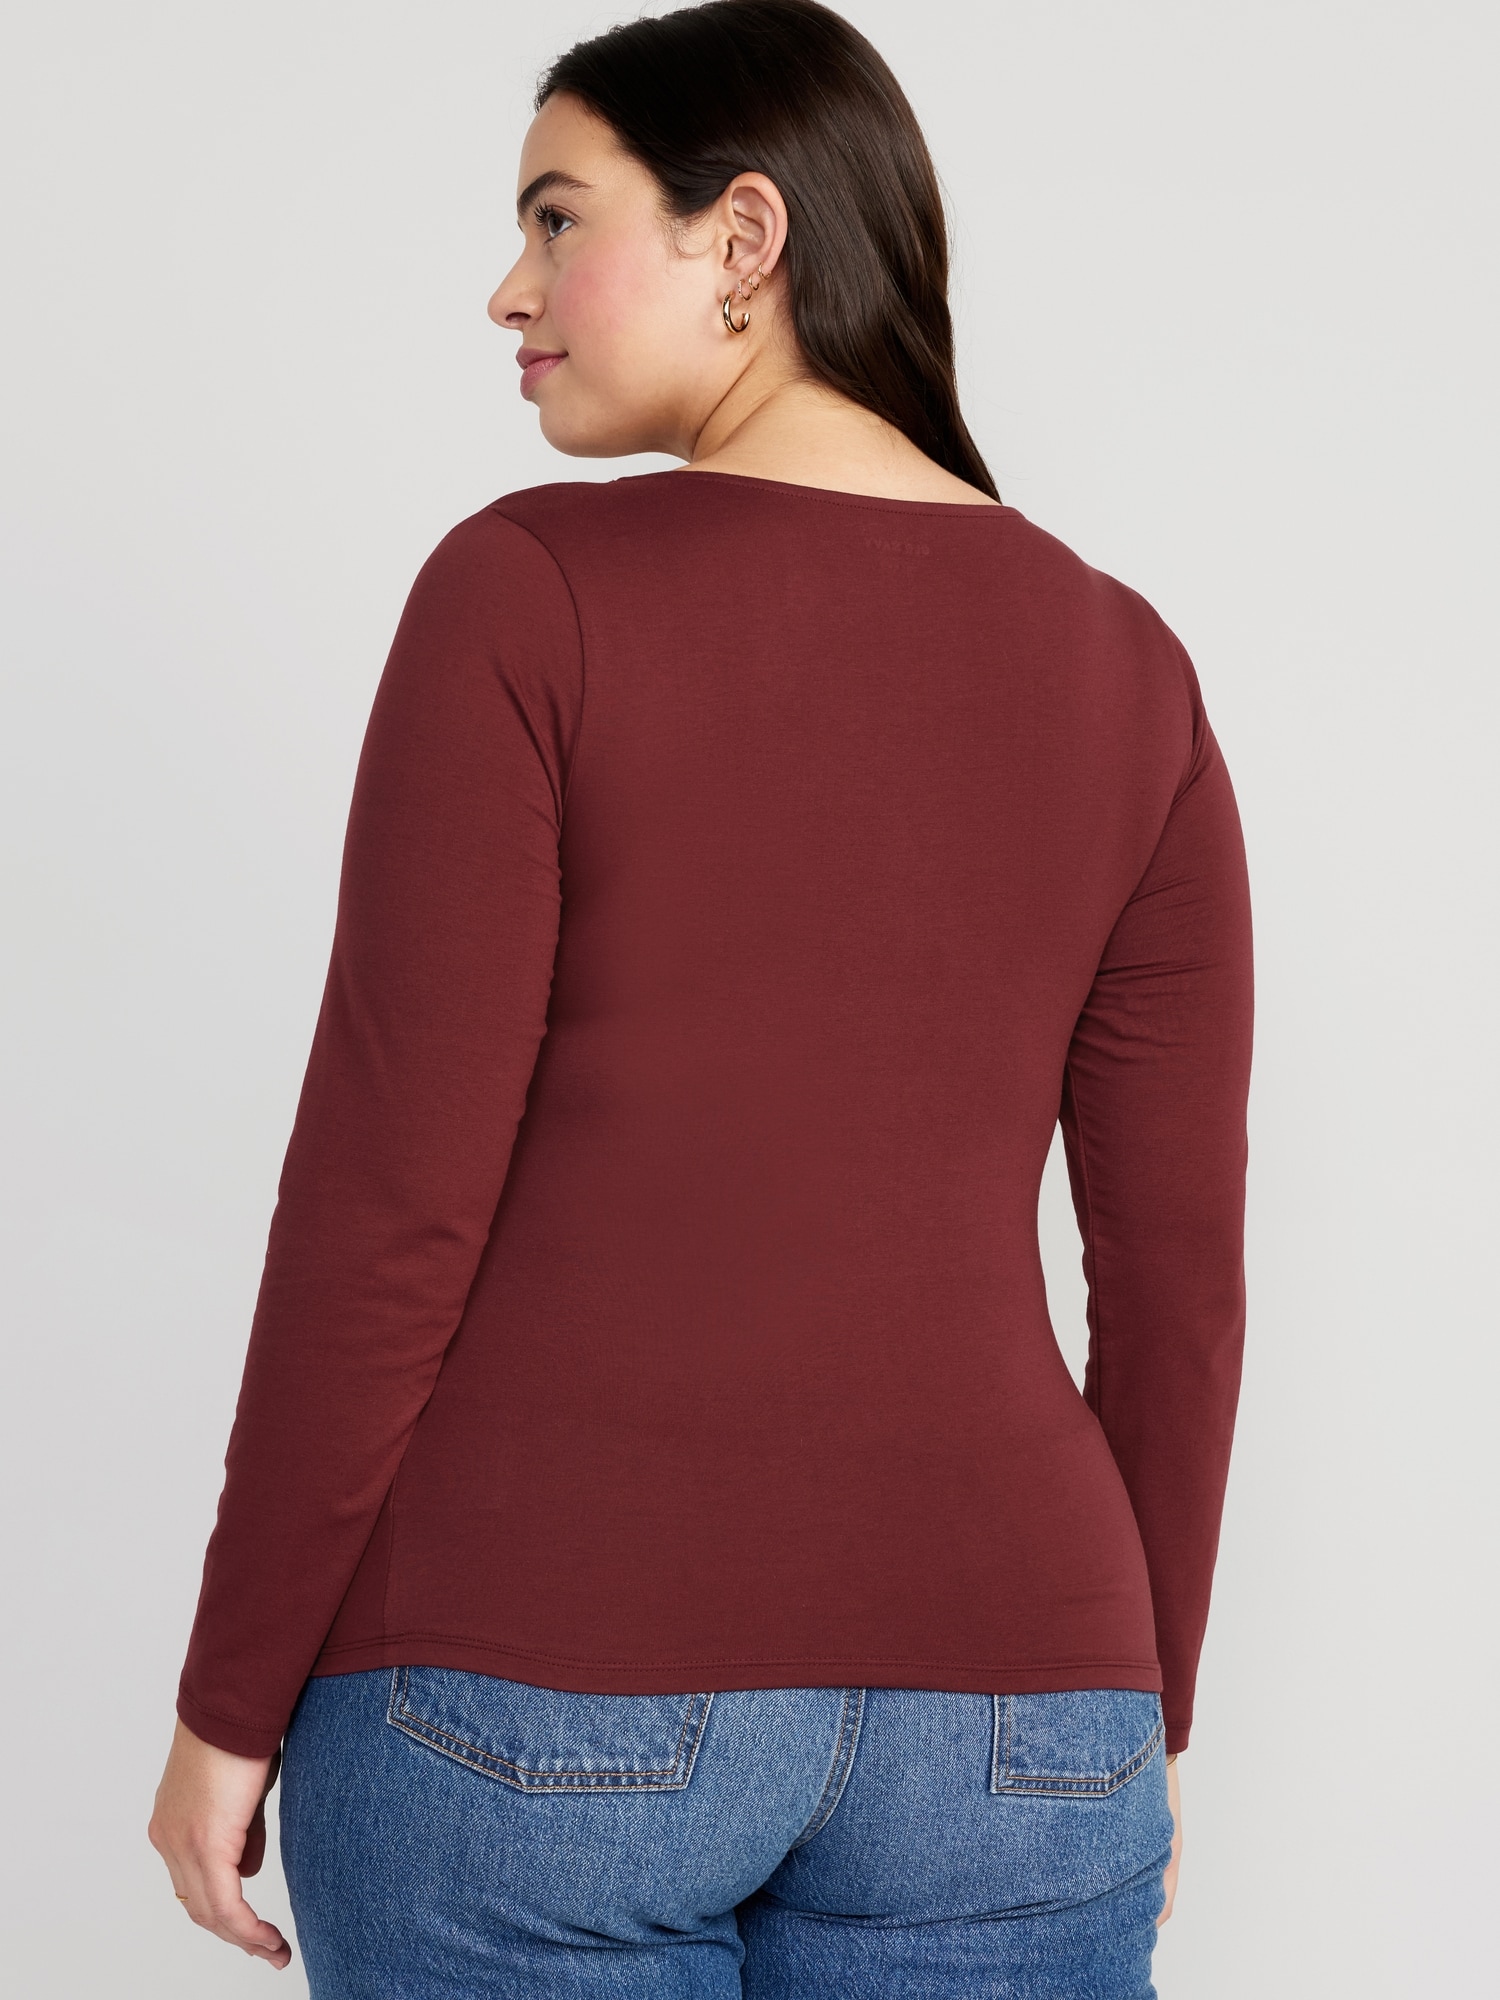 Fitted Twist-Front Top for Women | Old Navy